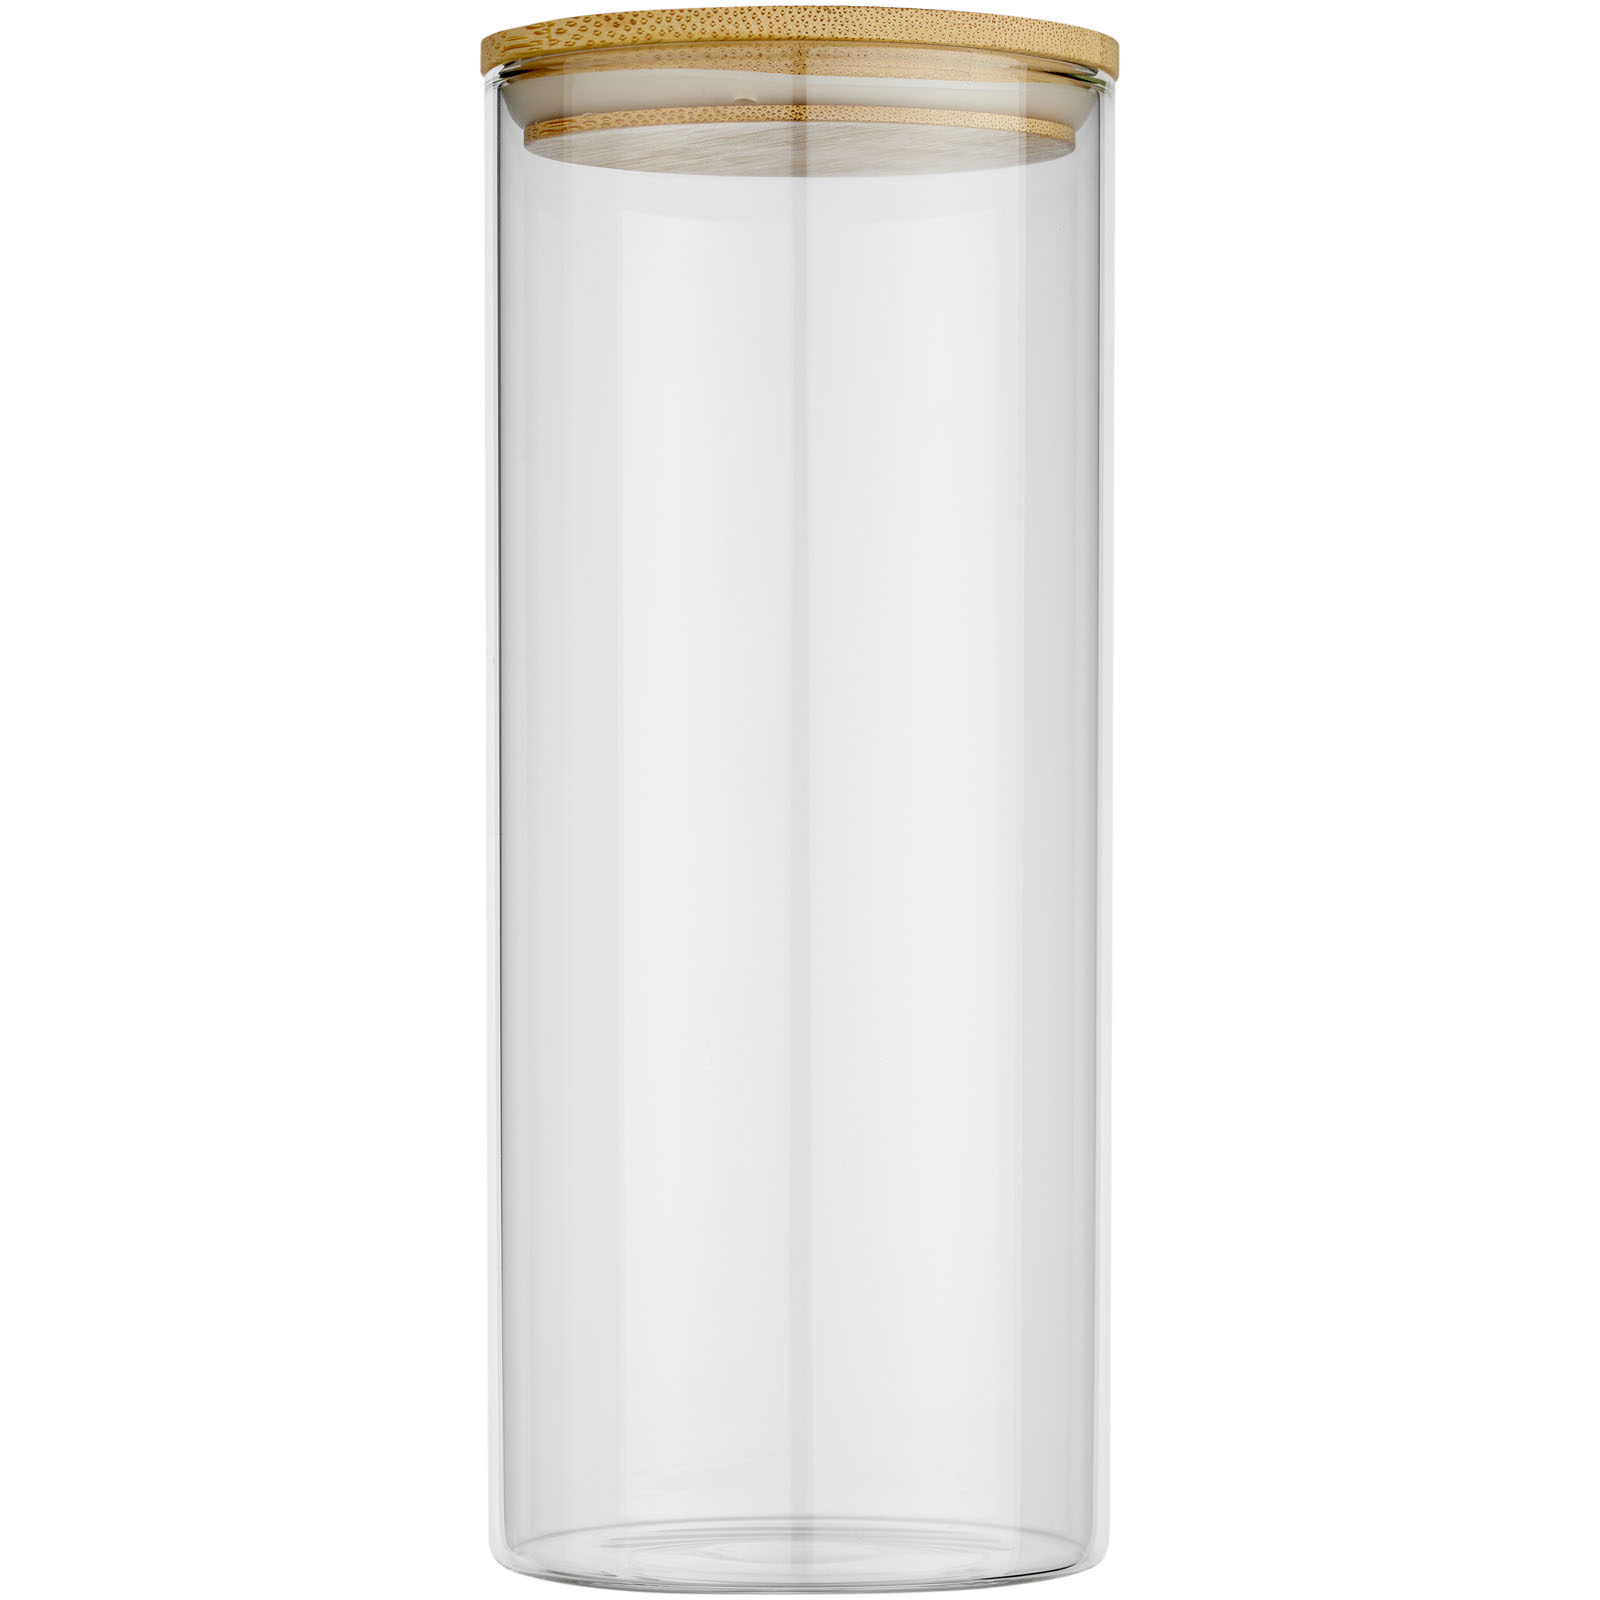 Advertising Kitchenware - Boley 940 ml glass food container - 2